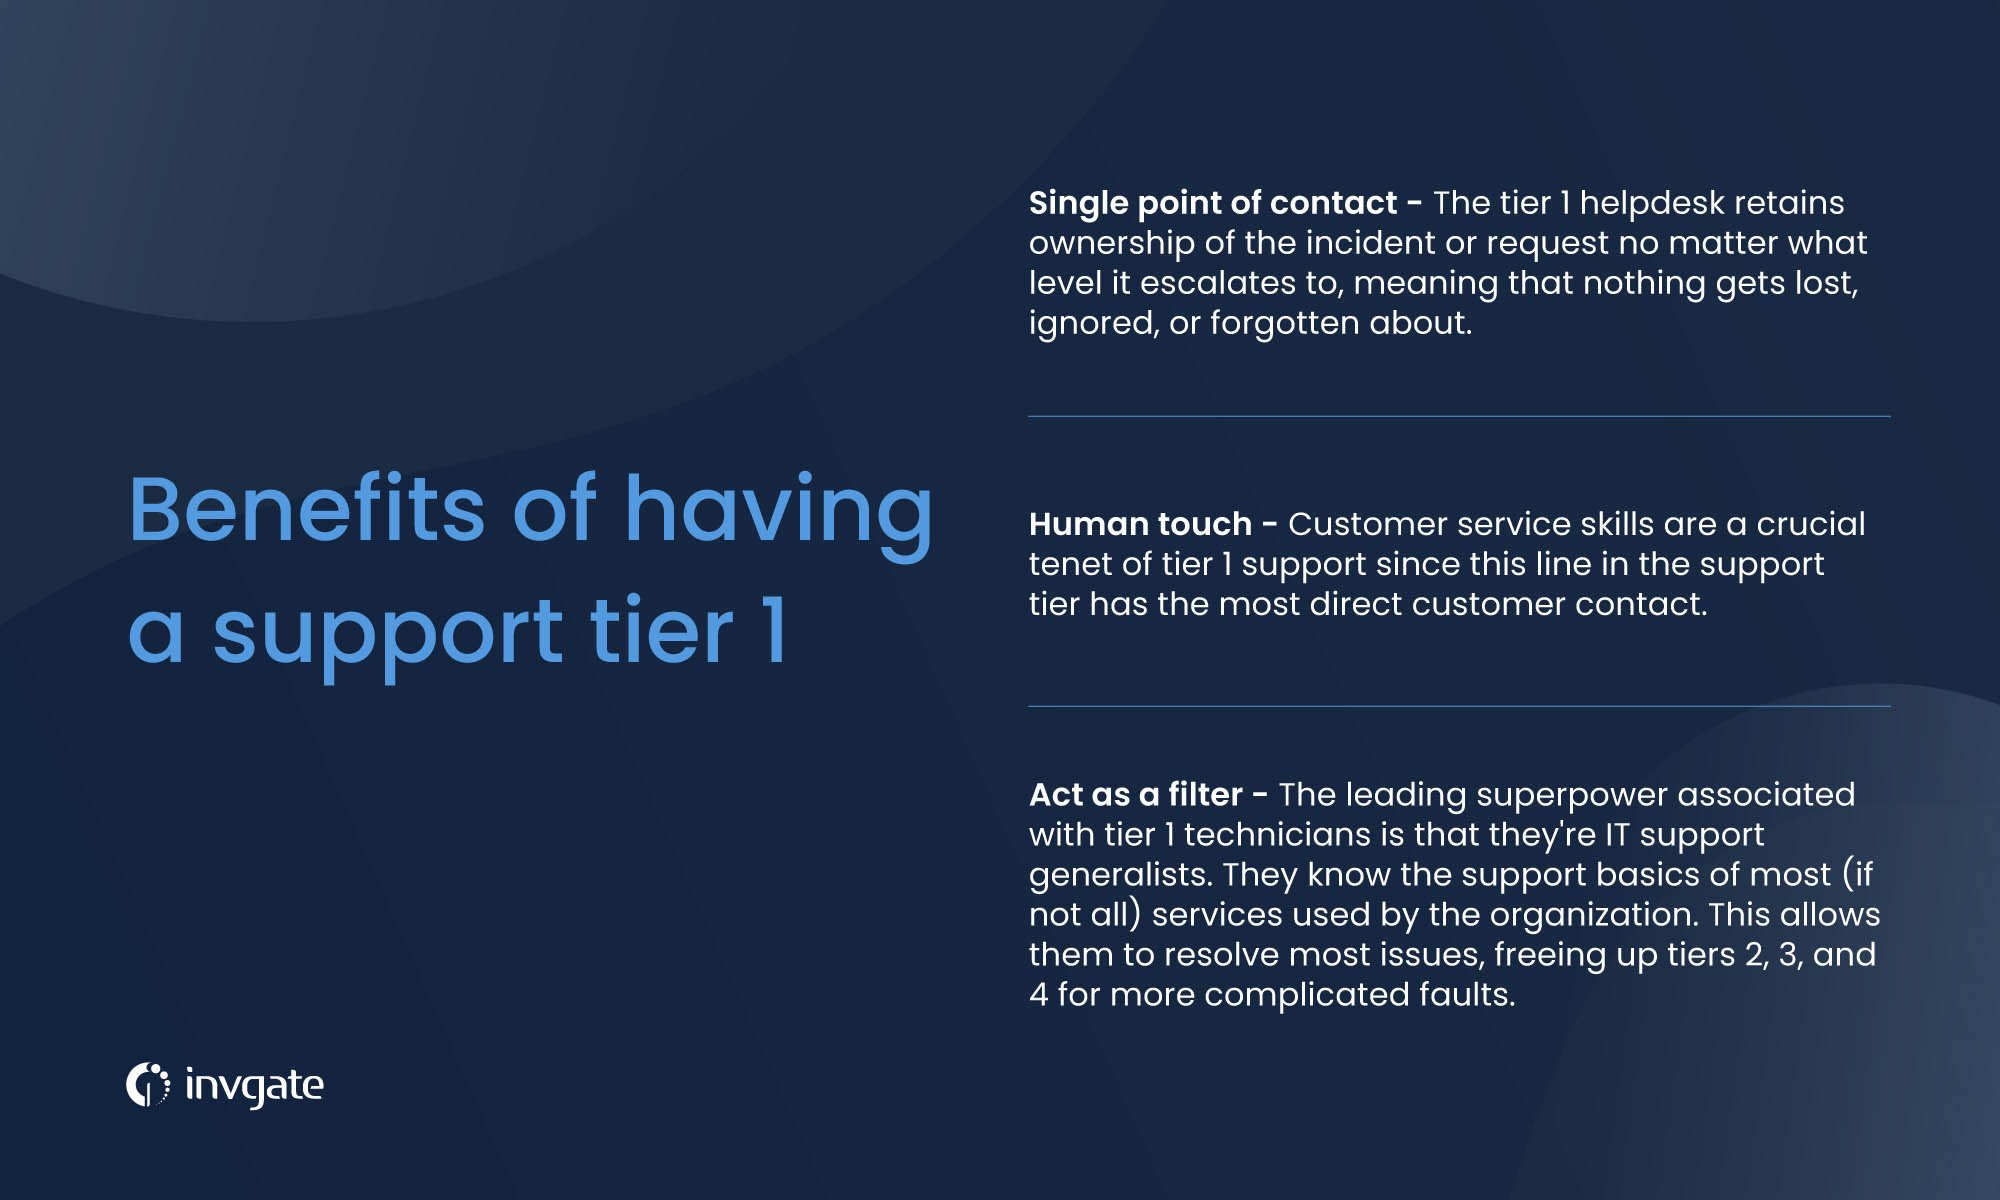 3 main benefits of having a support tier 1.